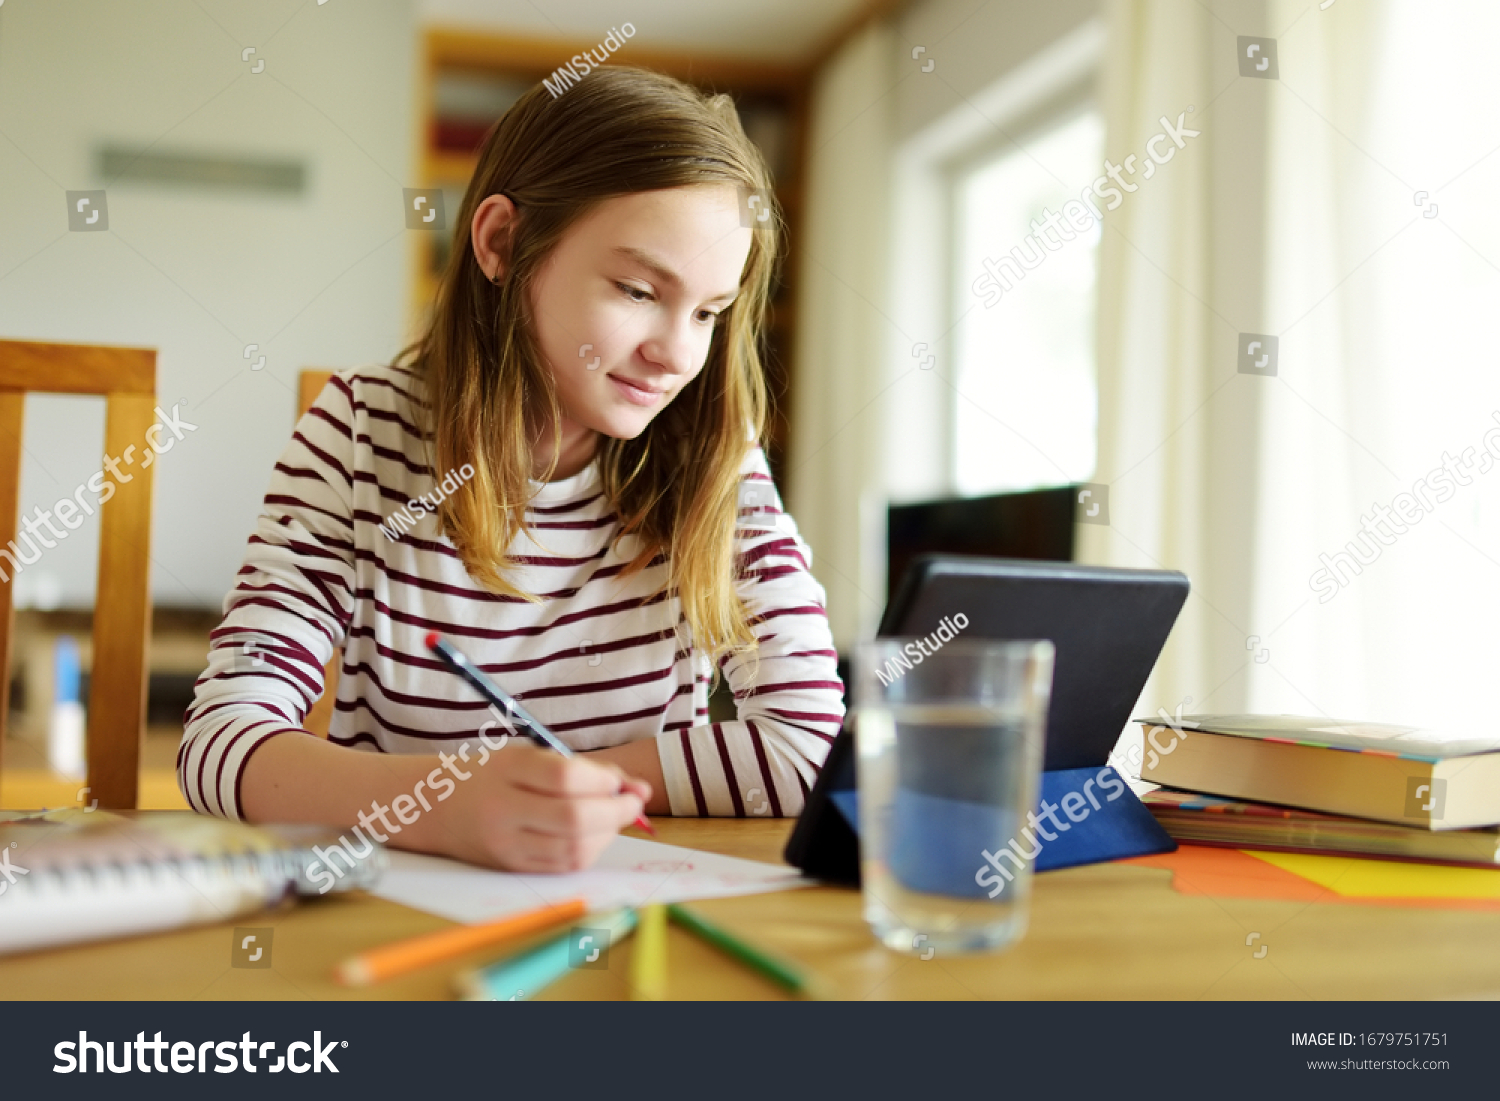 Preteen schoolgirl doing her homework with digital tablet at home. Child using gadgets to study. Education and distance learning for kids. Homeschooling during quarantine. Stay at home entertainment. #1679751751